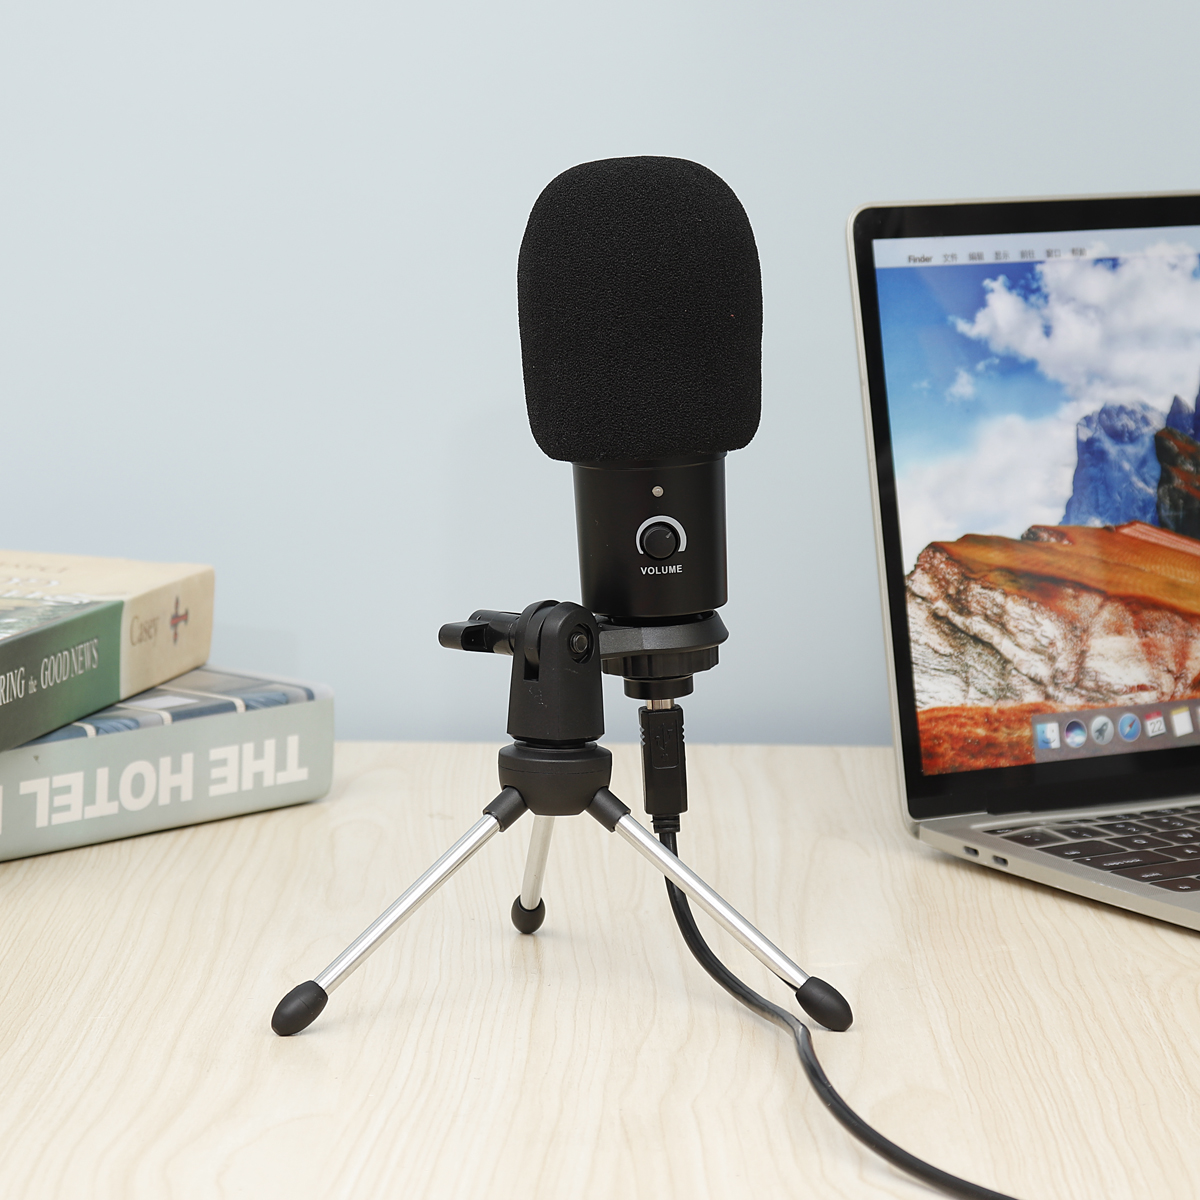 Wired USB Microphone with Tripod for Computer Windows for Mac PC Live Broadcast Video Conferencing Audio Recording YouTube